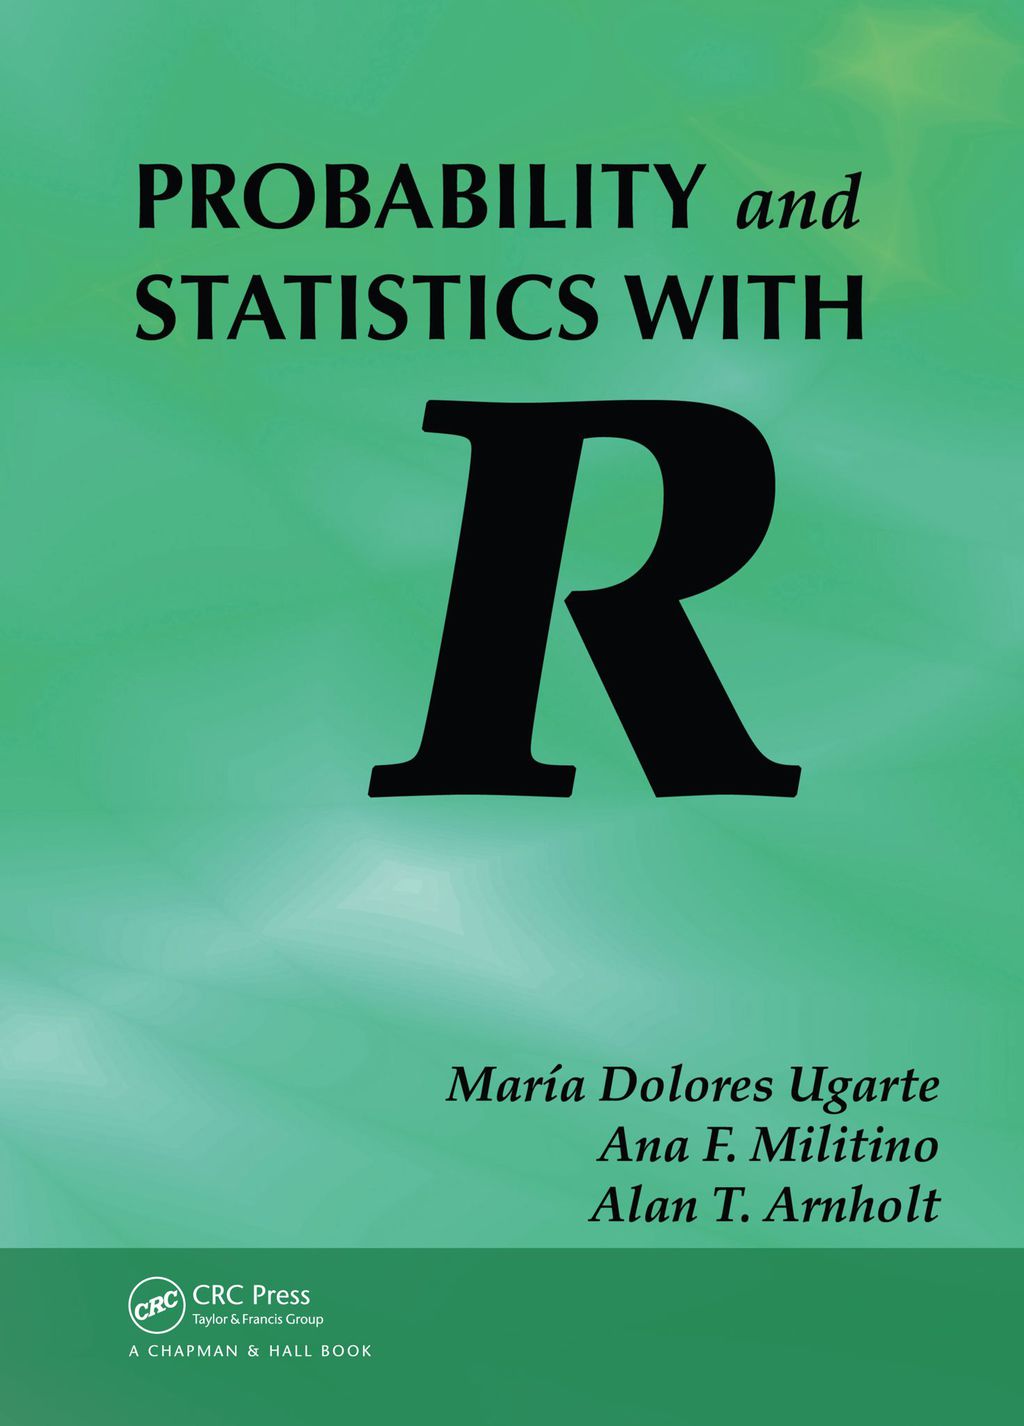 Probability and Statistics with R (eBook) - Maria Dolores Ugarte